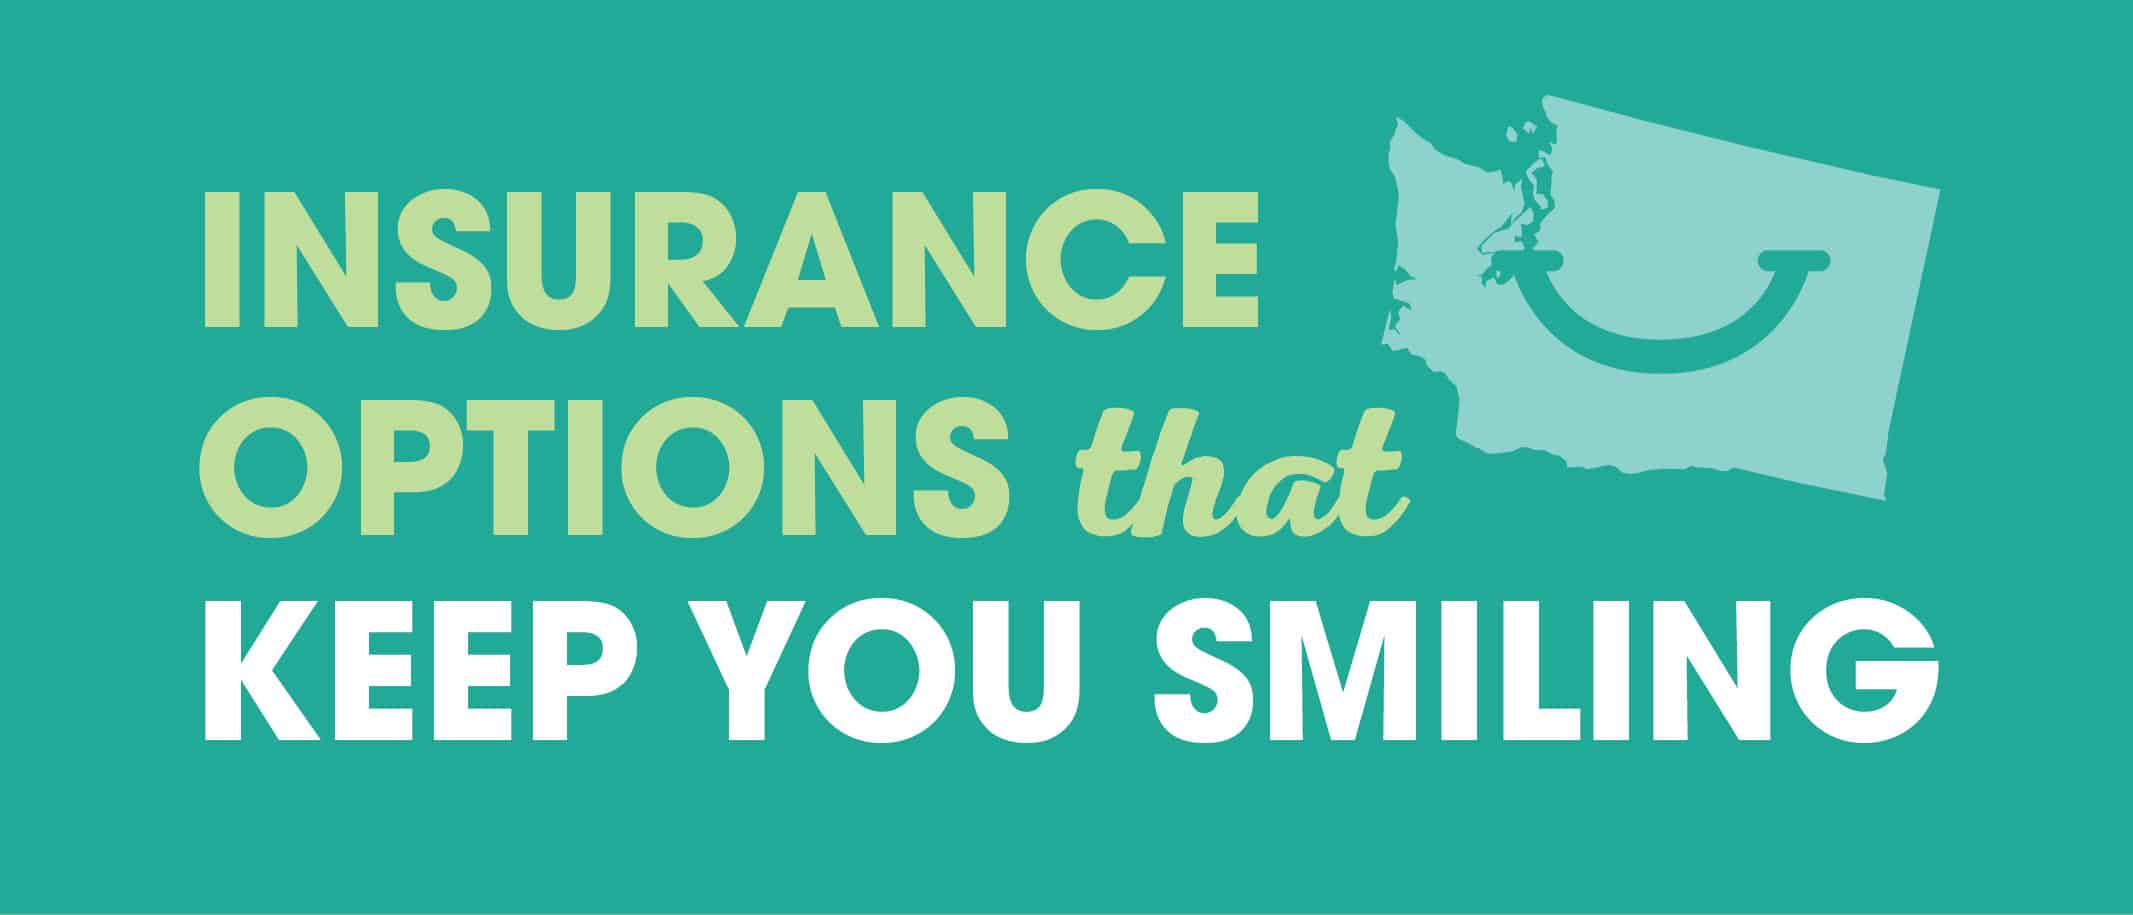 Insurance Options that Keep You Smiling